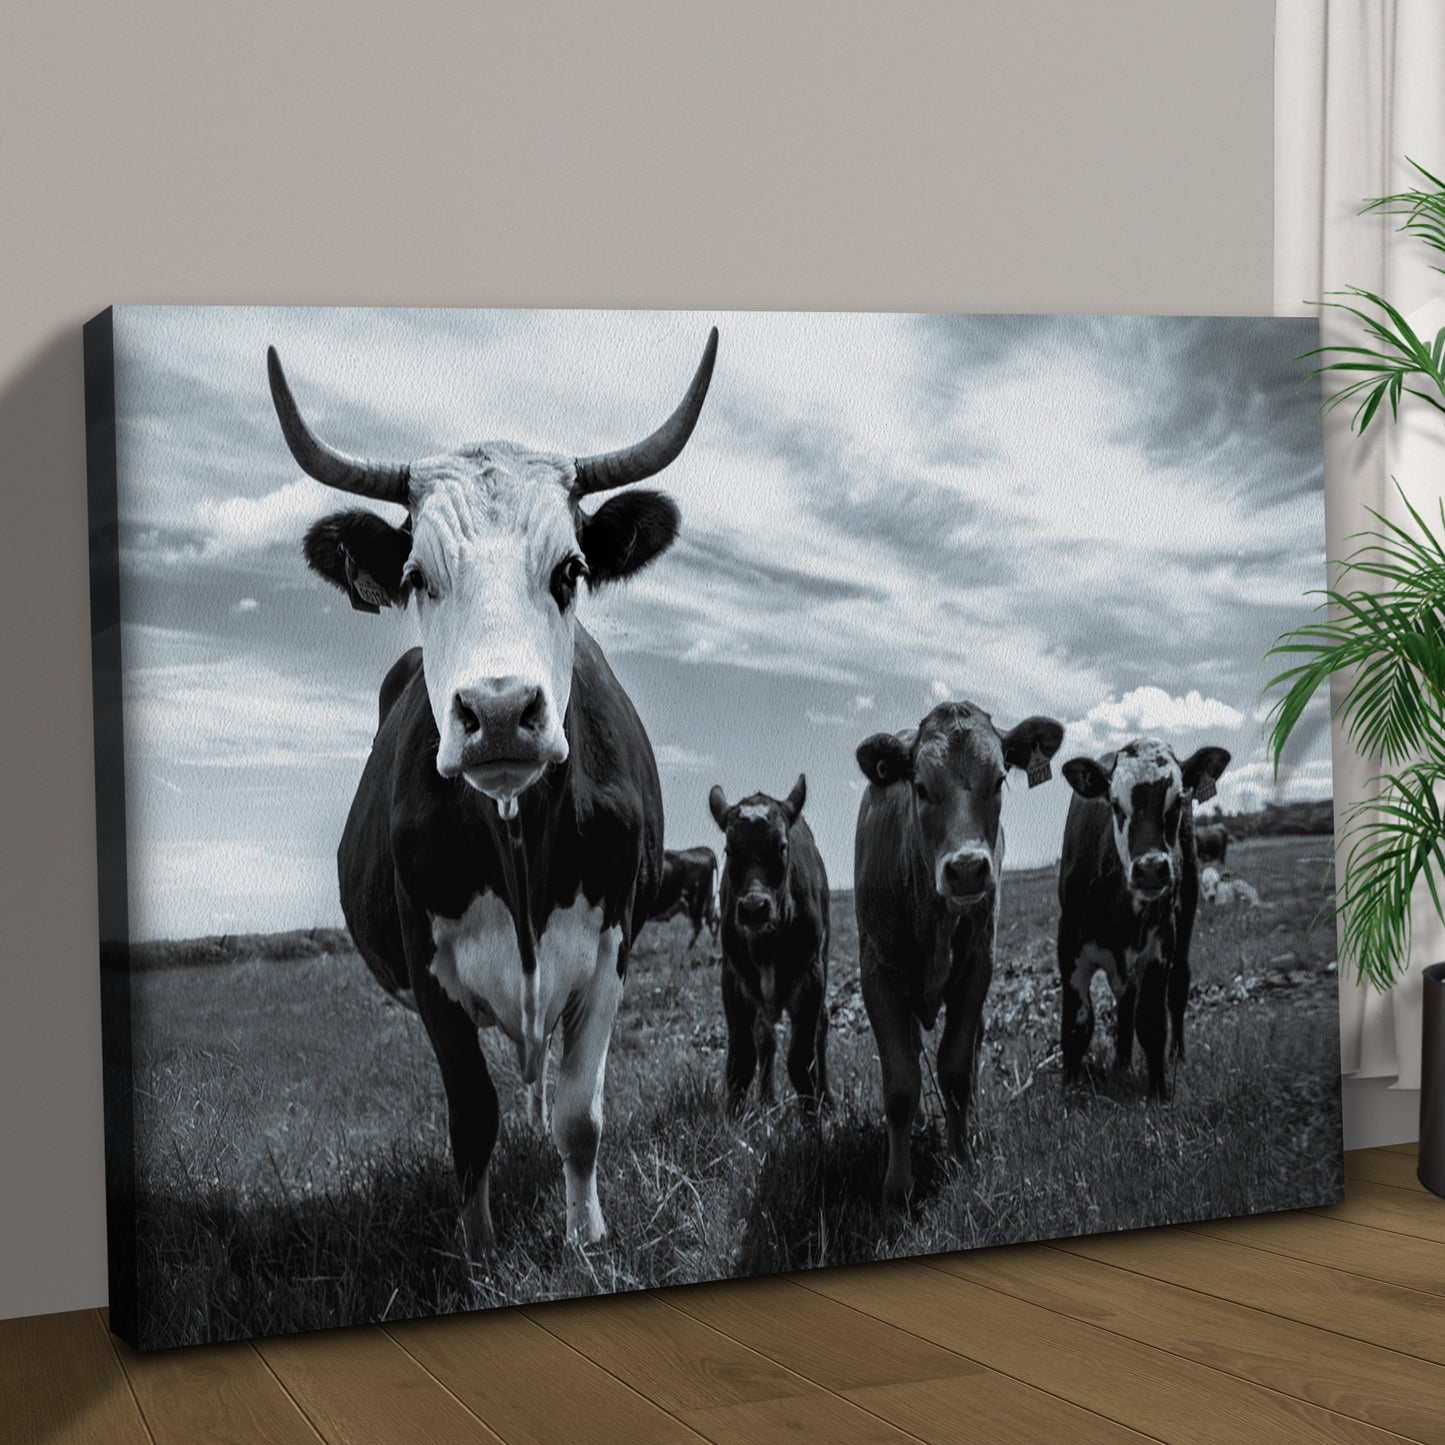 Grayscale Curious Cattle Cows Canvas Wall Art Style 1 - Image by Tailored Canvases